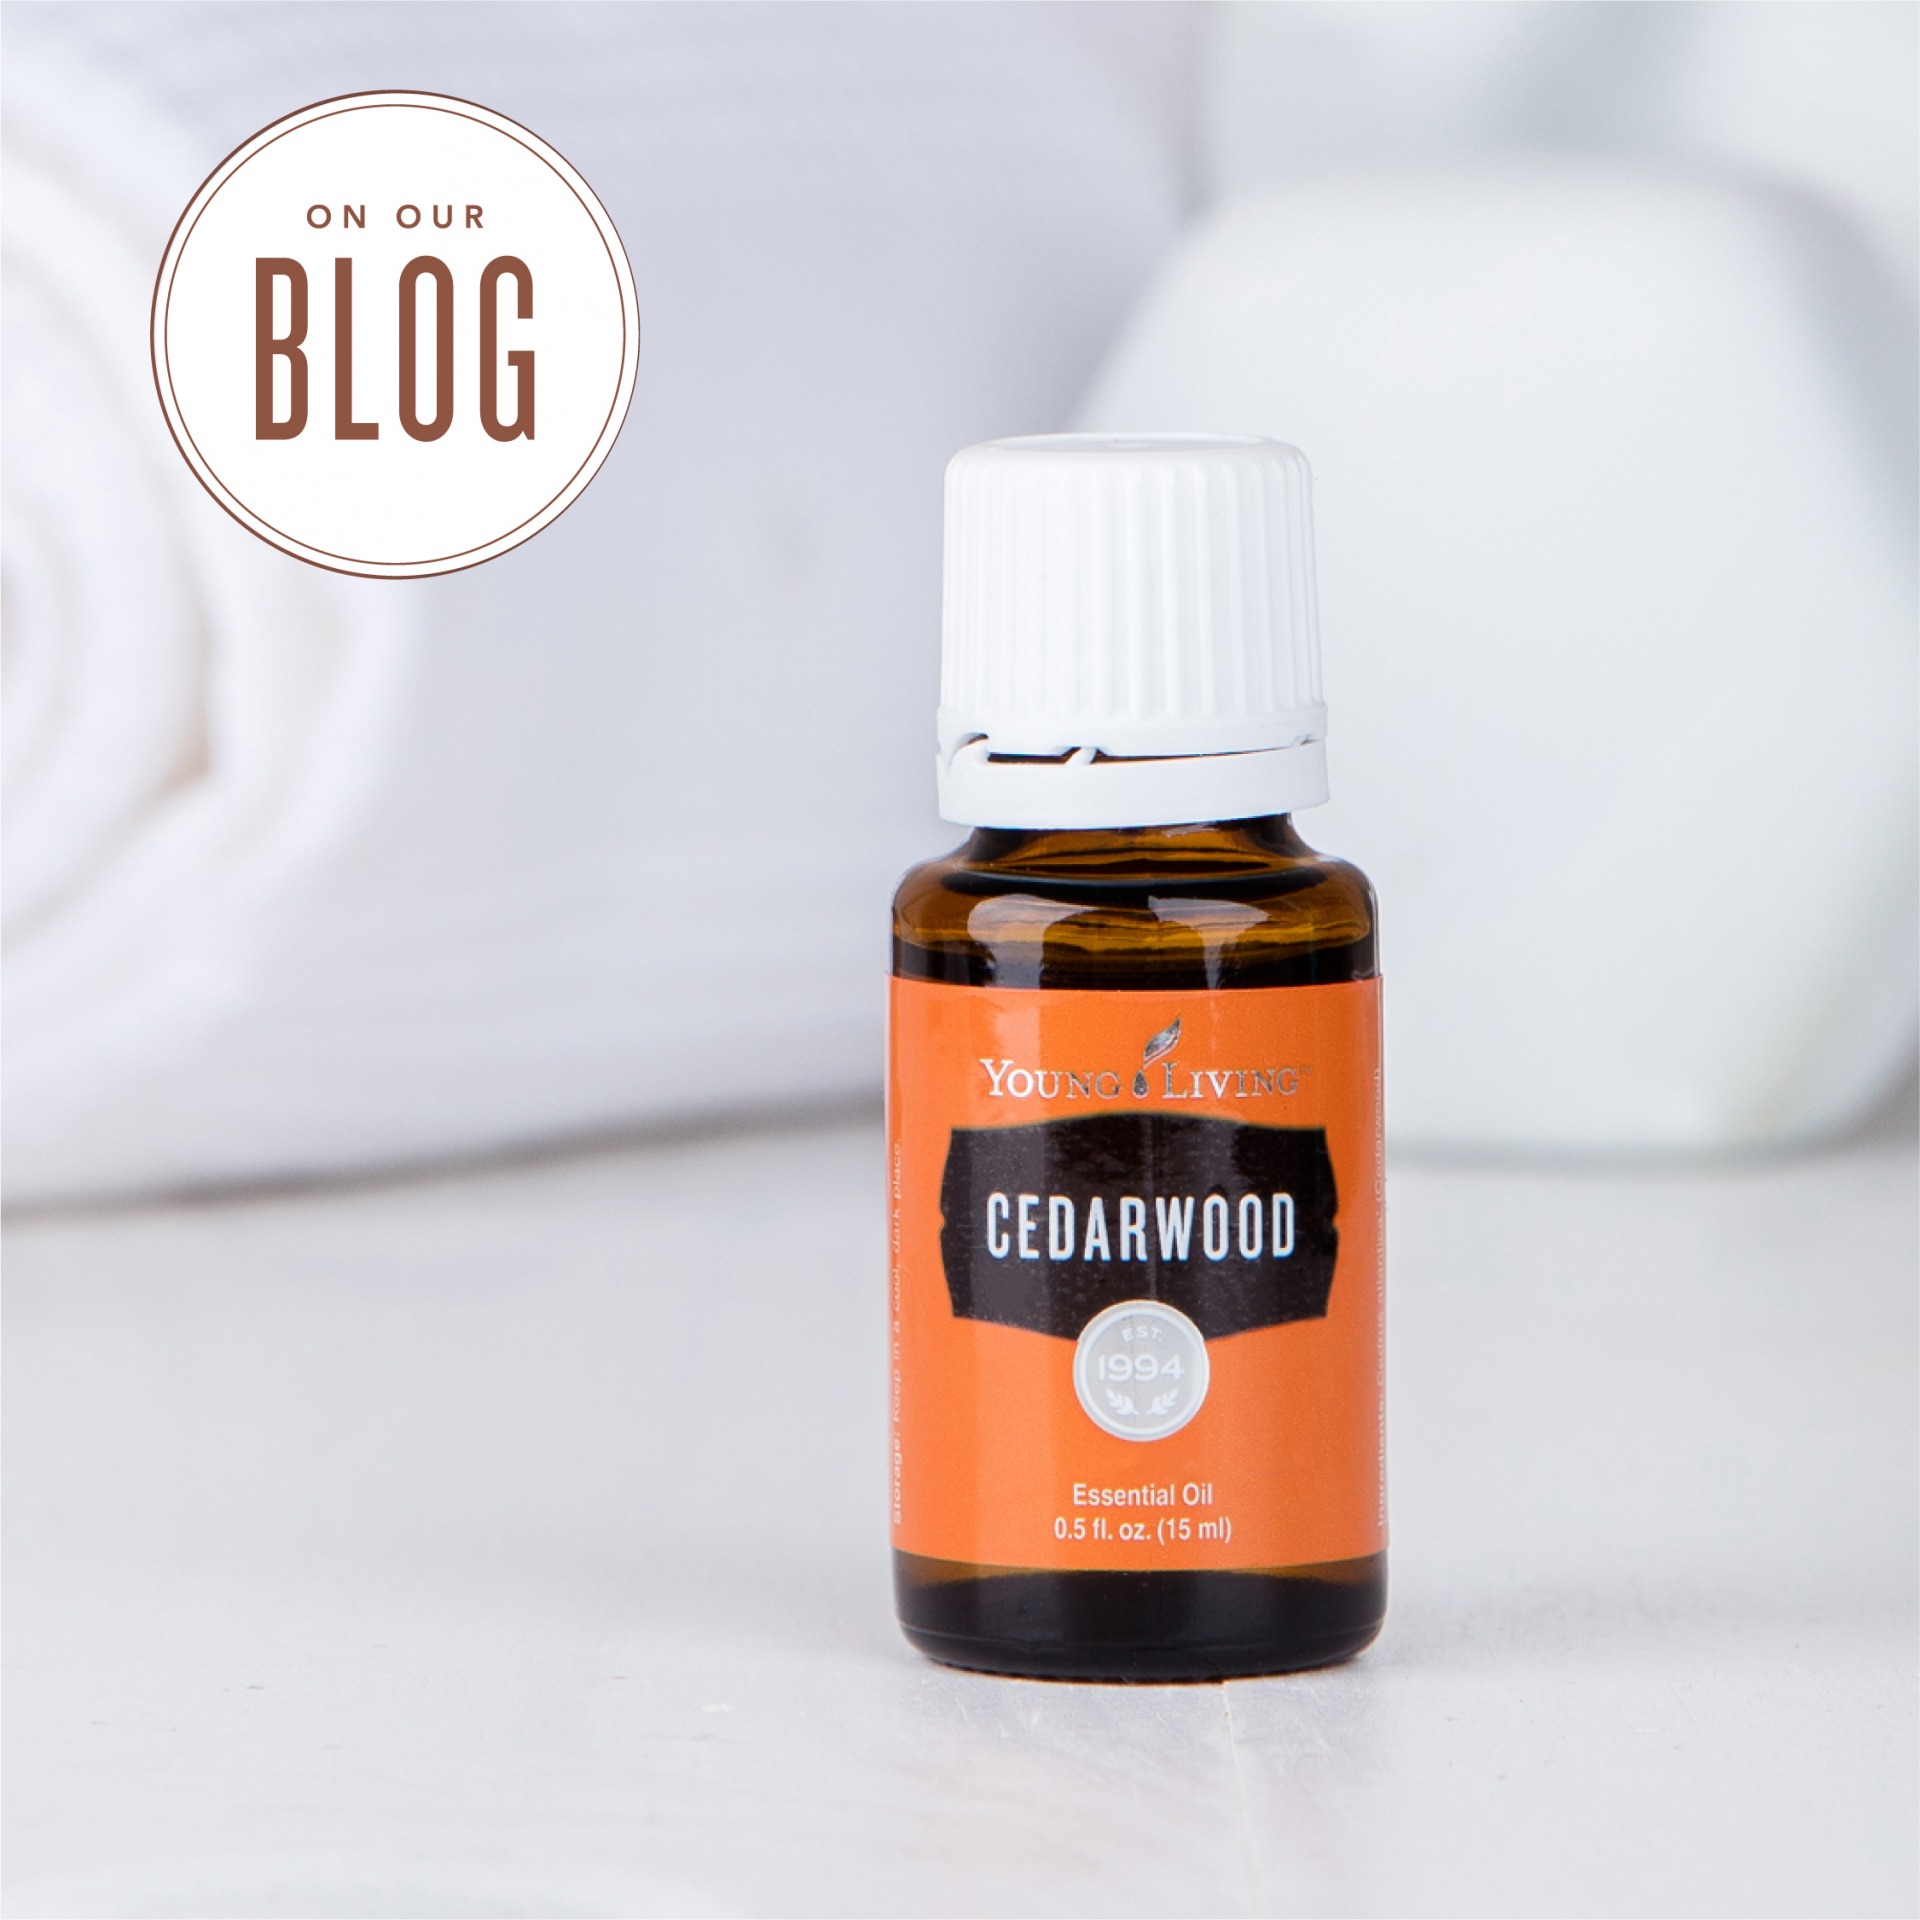 6 Beauty Enhancing Cedarwood Essential Oil Uses - Young Living Blog